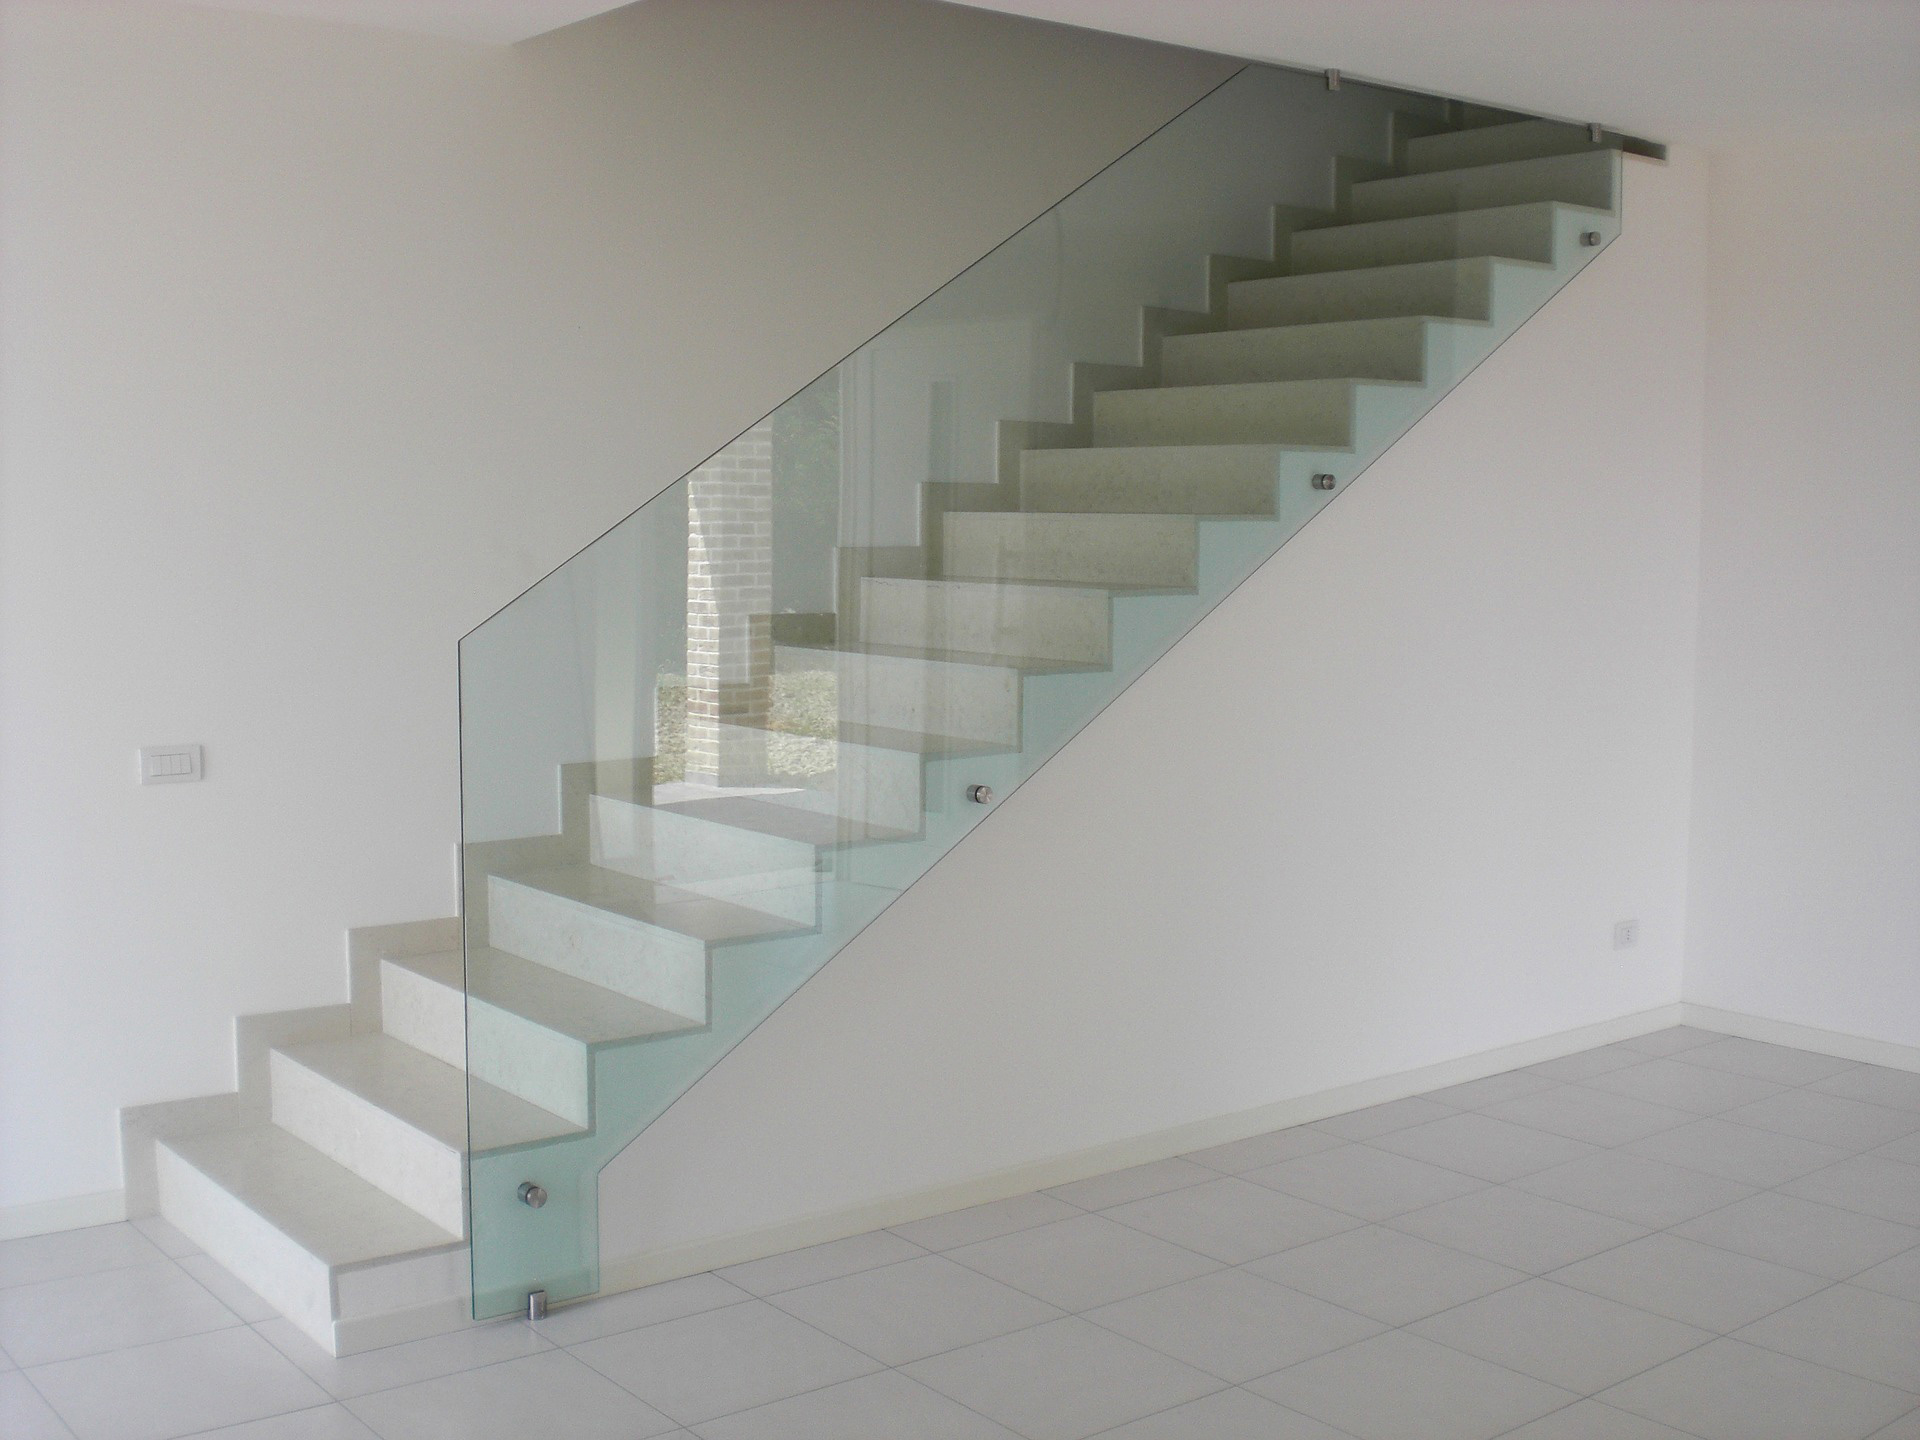 A sheet of tempered glass acting as a staircase railing. The glass has a noticeable green tint.